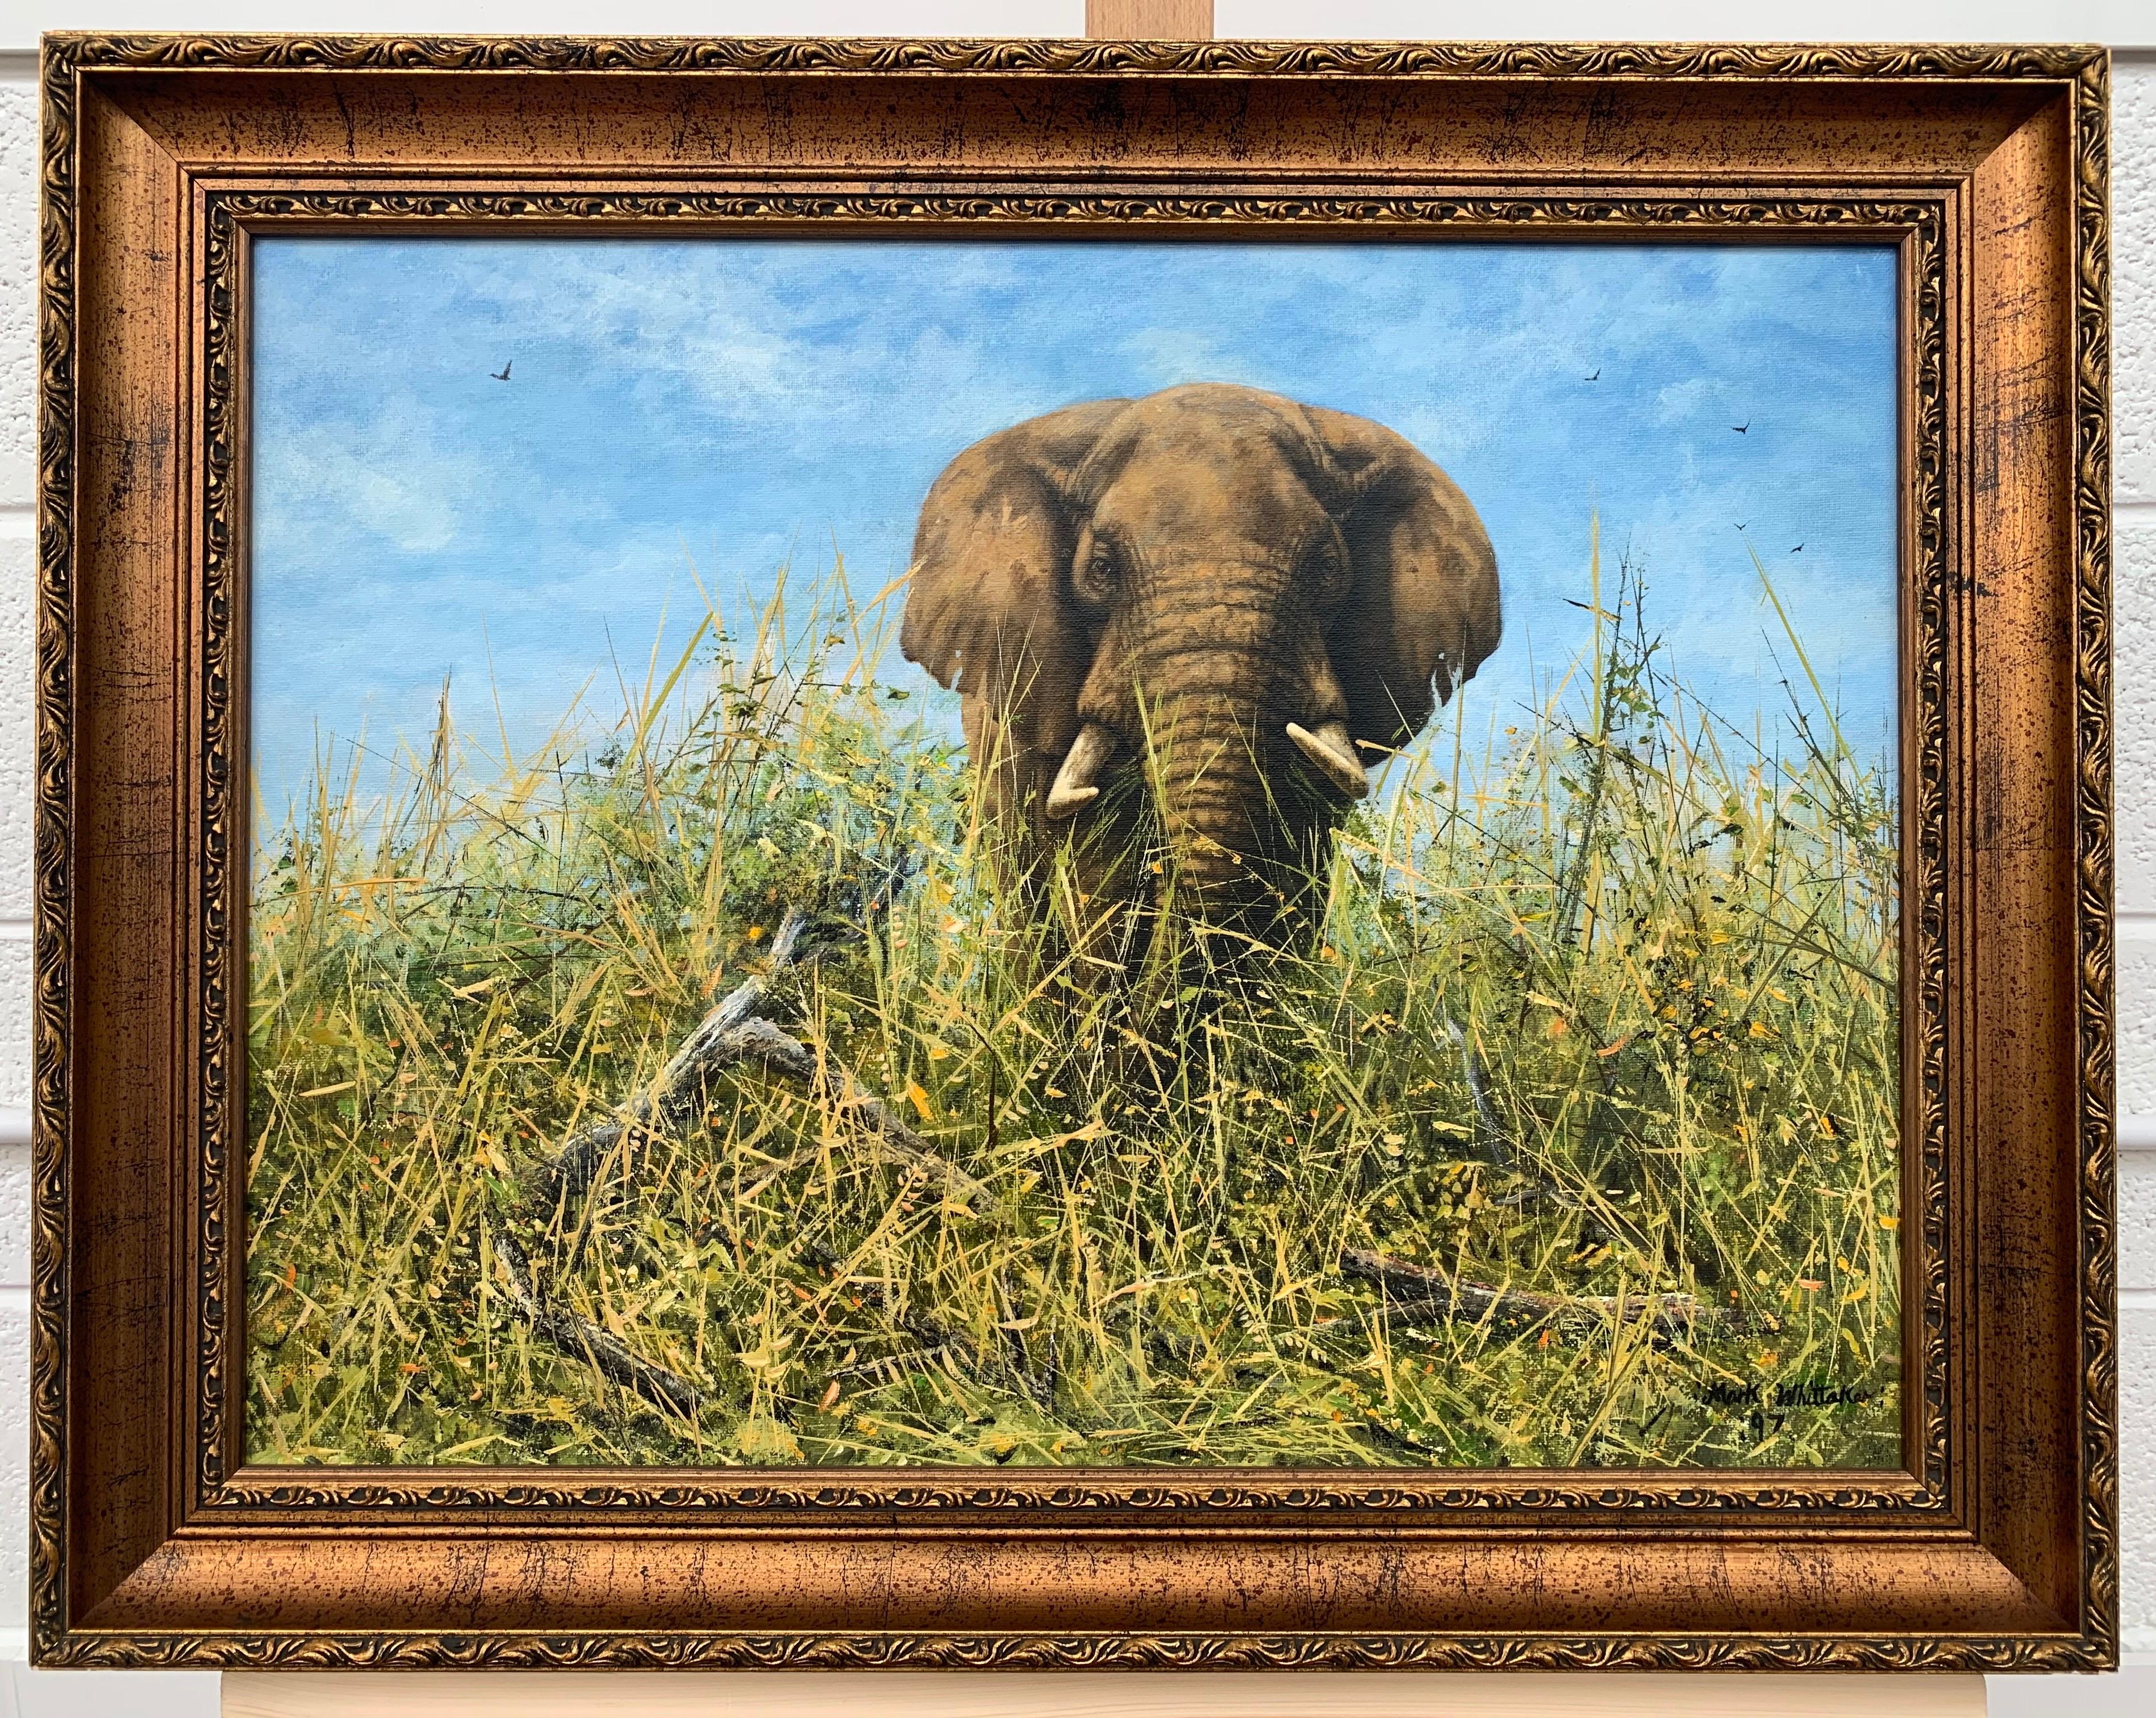 Original Oil Painting of Elephant in the Wild by British Contemporary Artist For Sale 5